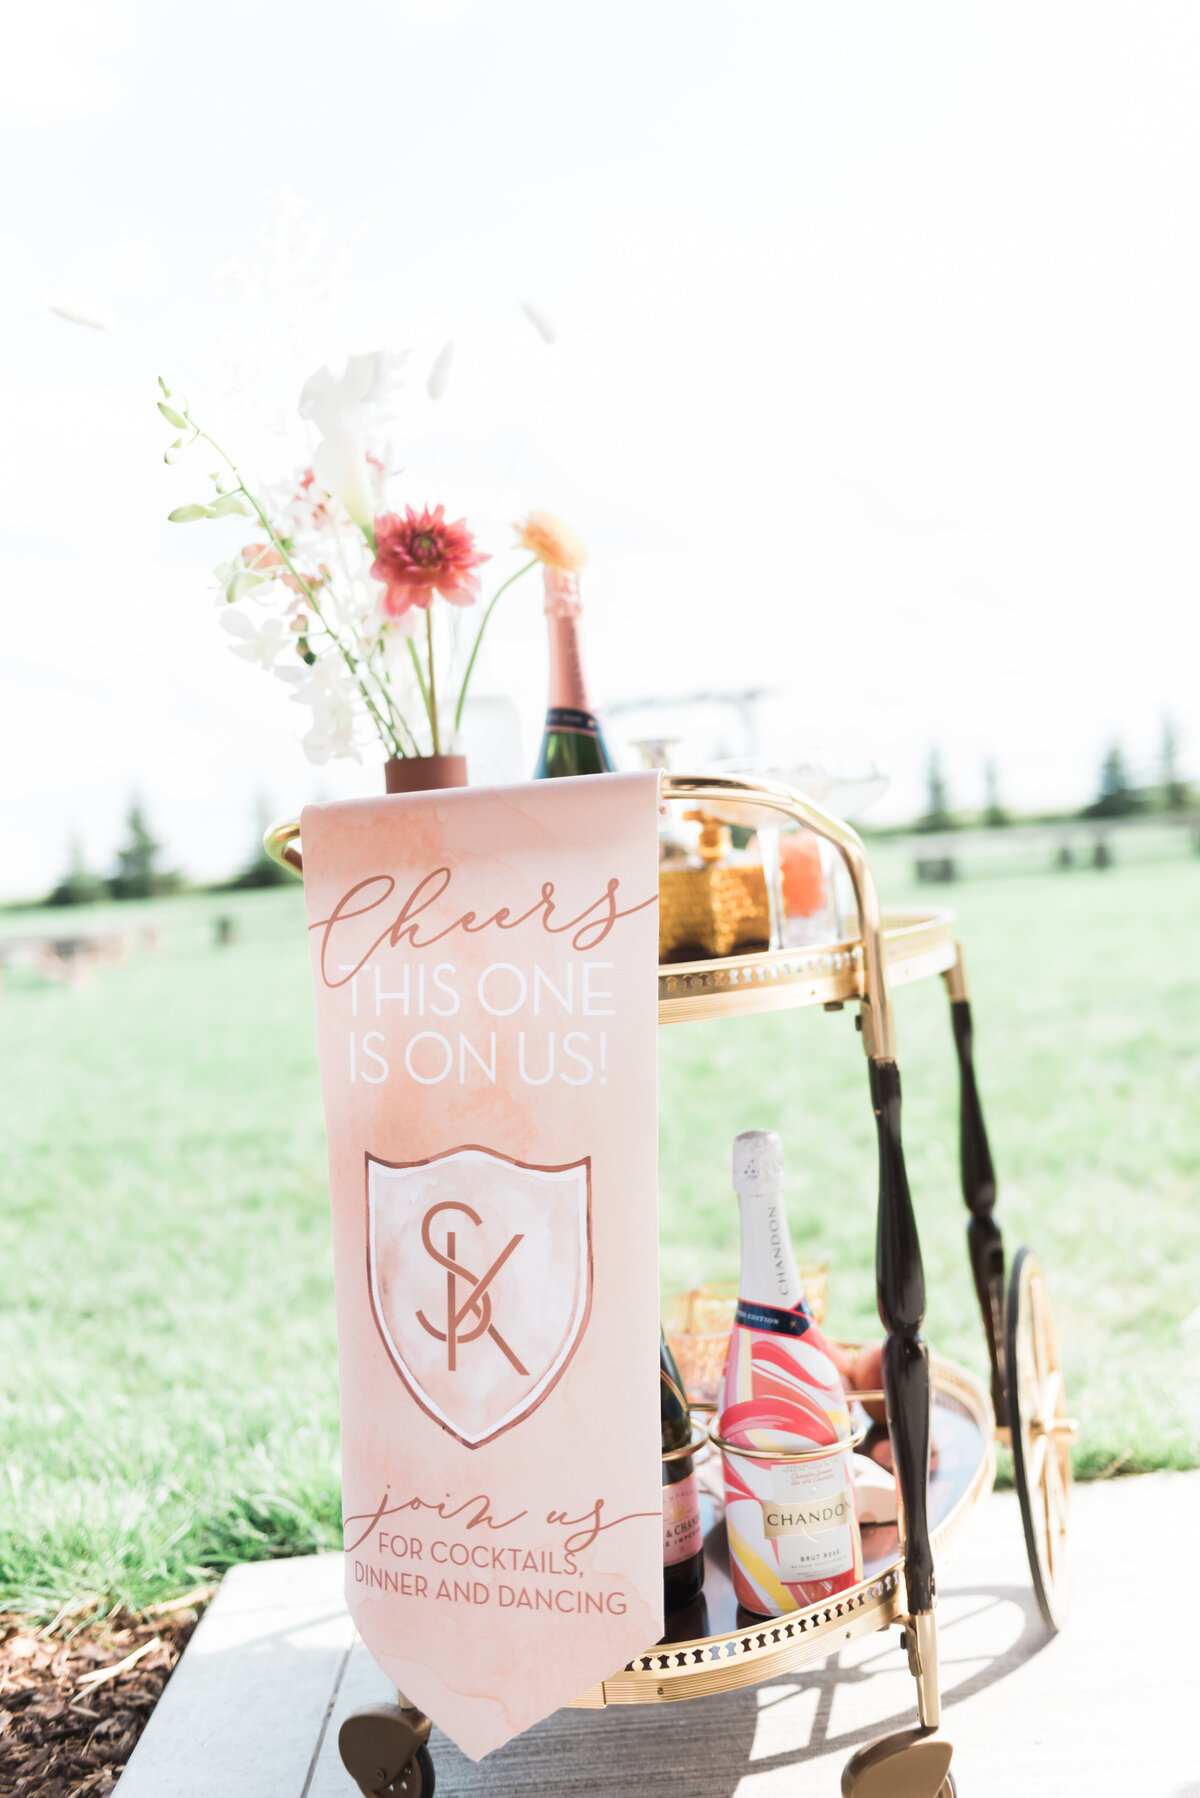 Custom wedding signage by The Social Page, custom wedding invitations & signage based in Calgary, Alberta.  Featured on the Brontë Bride Vendor Guide.